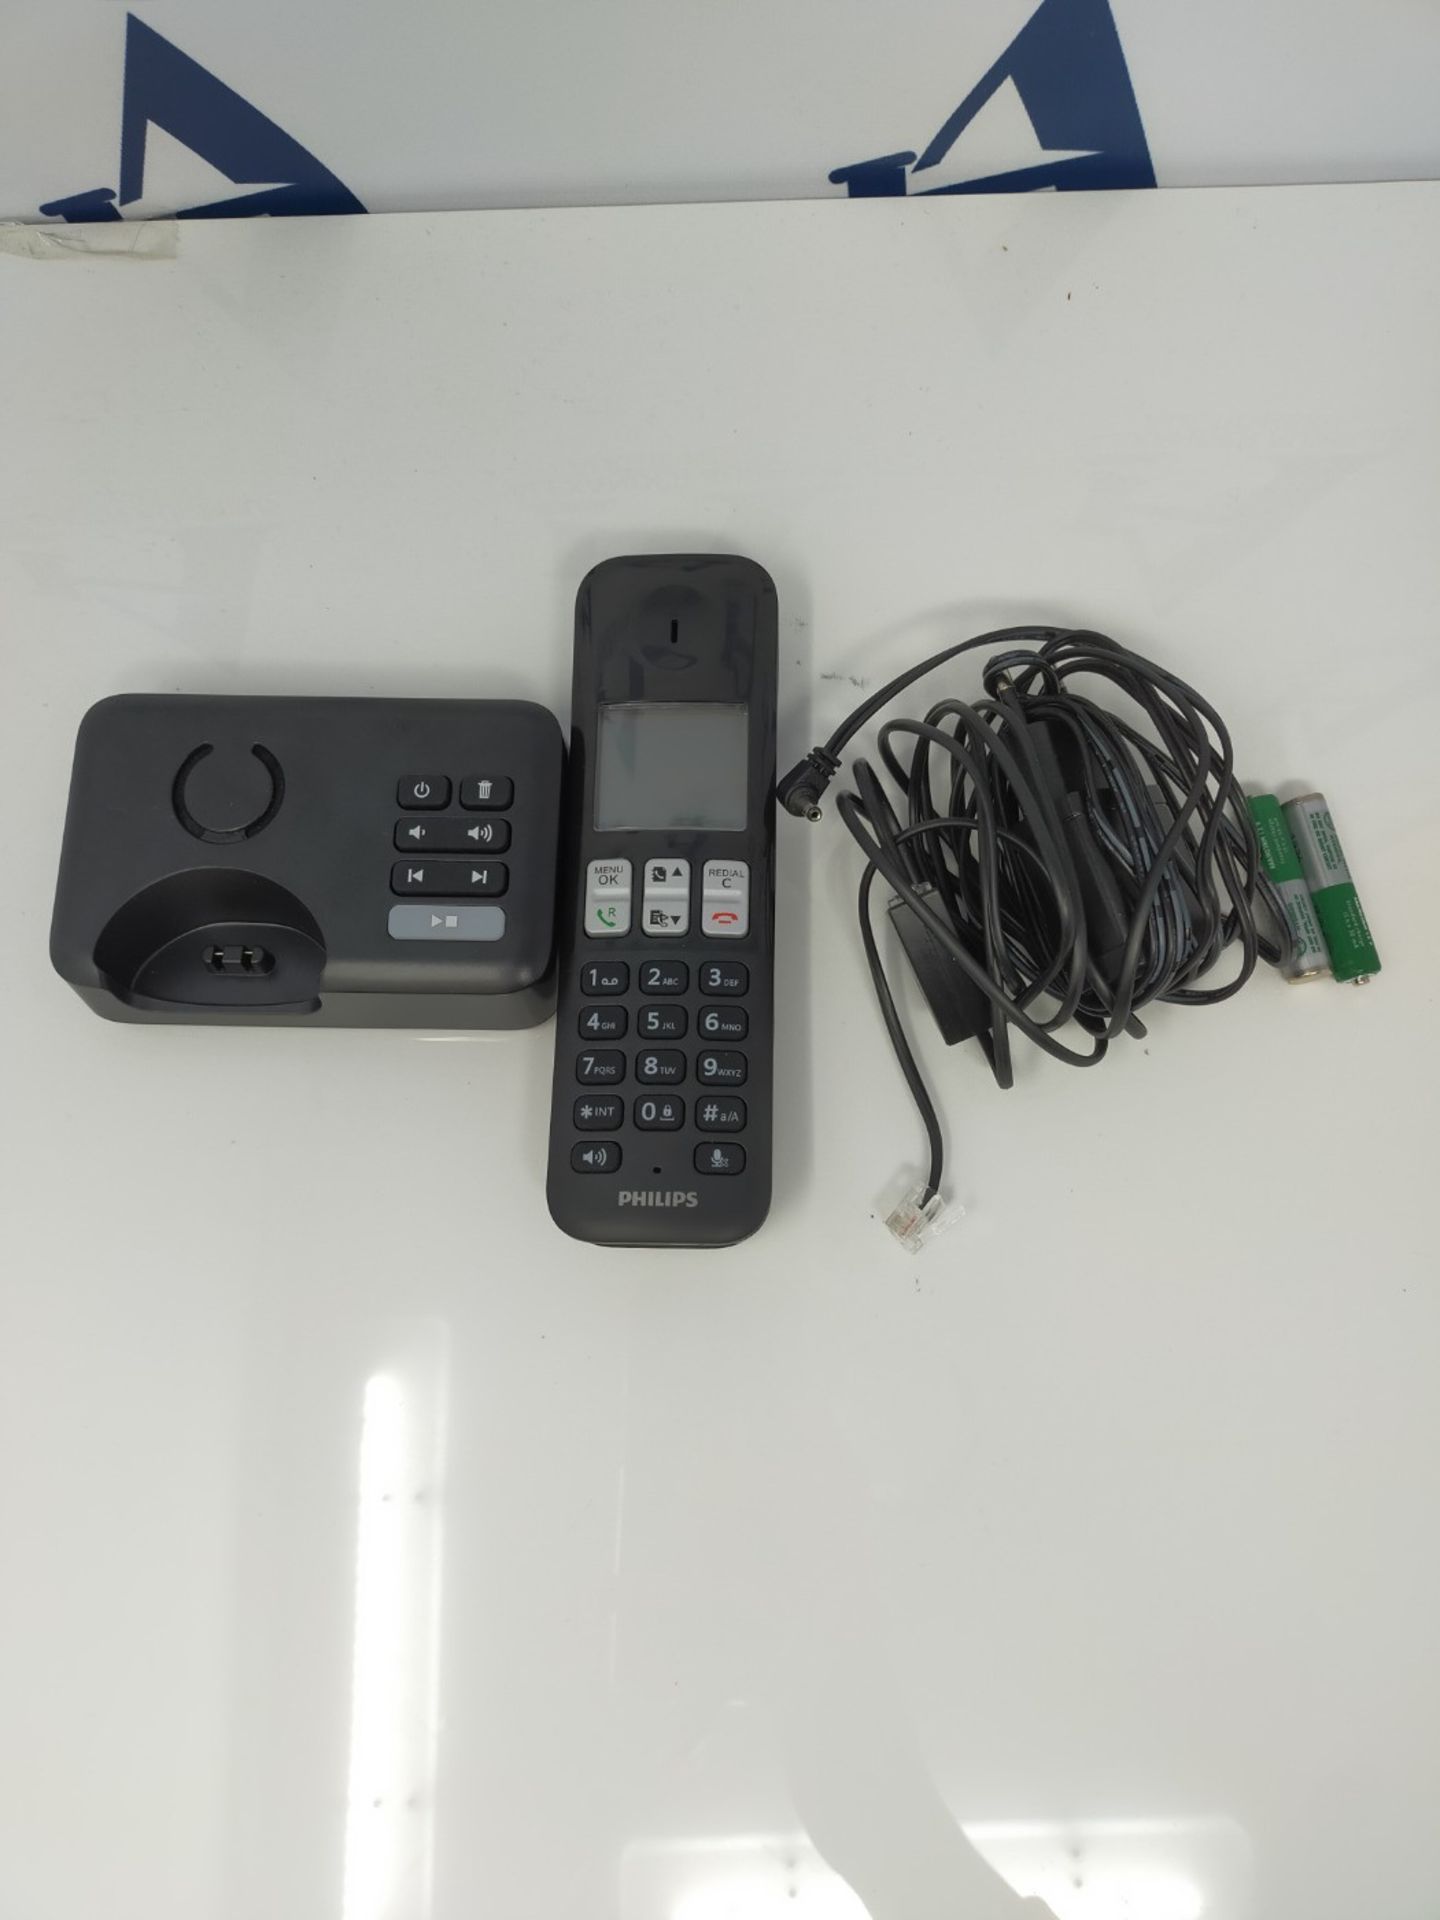 Philips D2551B/01 DECT cordless telephone with answering machine - Image 3 of 3